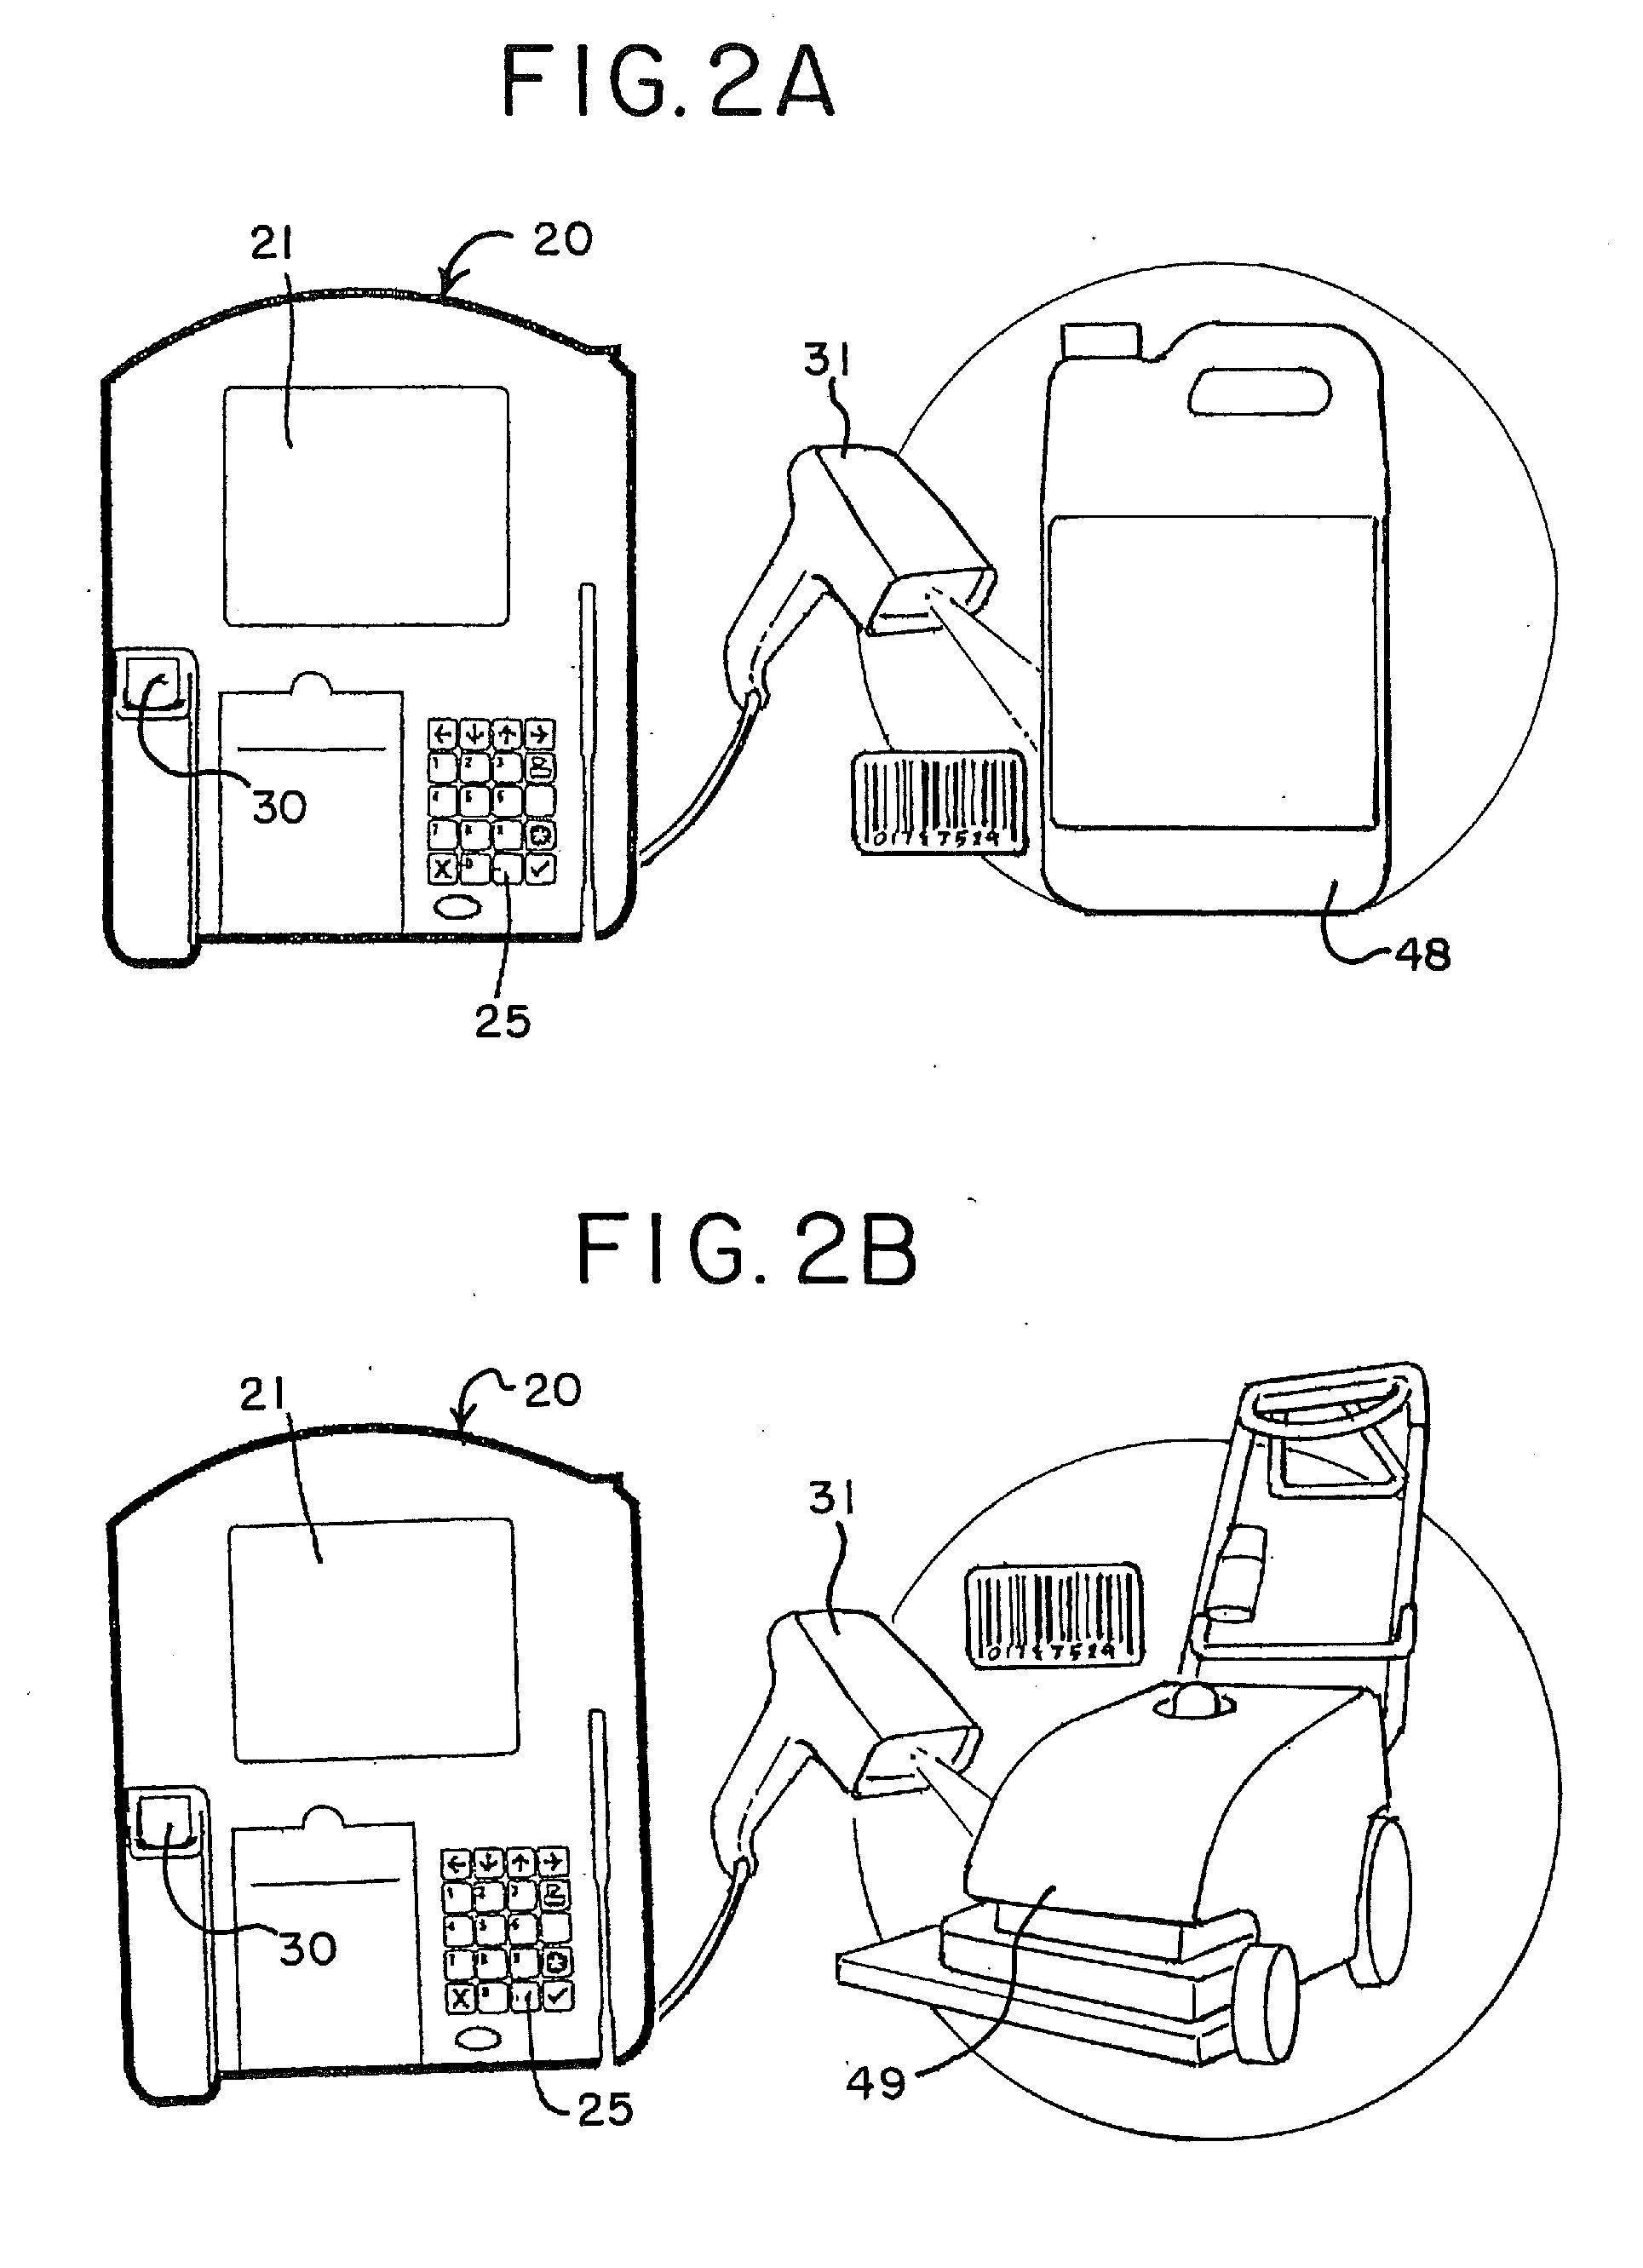 Biometric multi-purpose biometric terminal, payroll and work management system and related methods